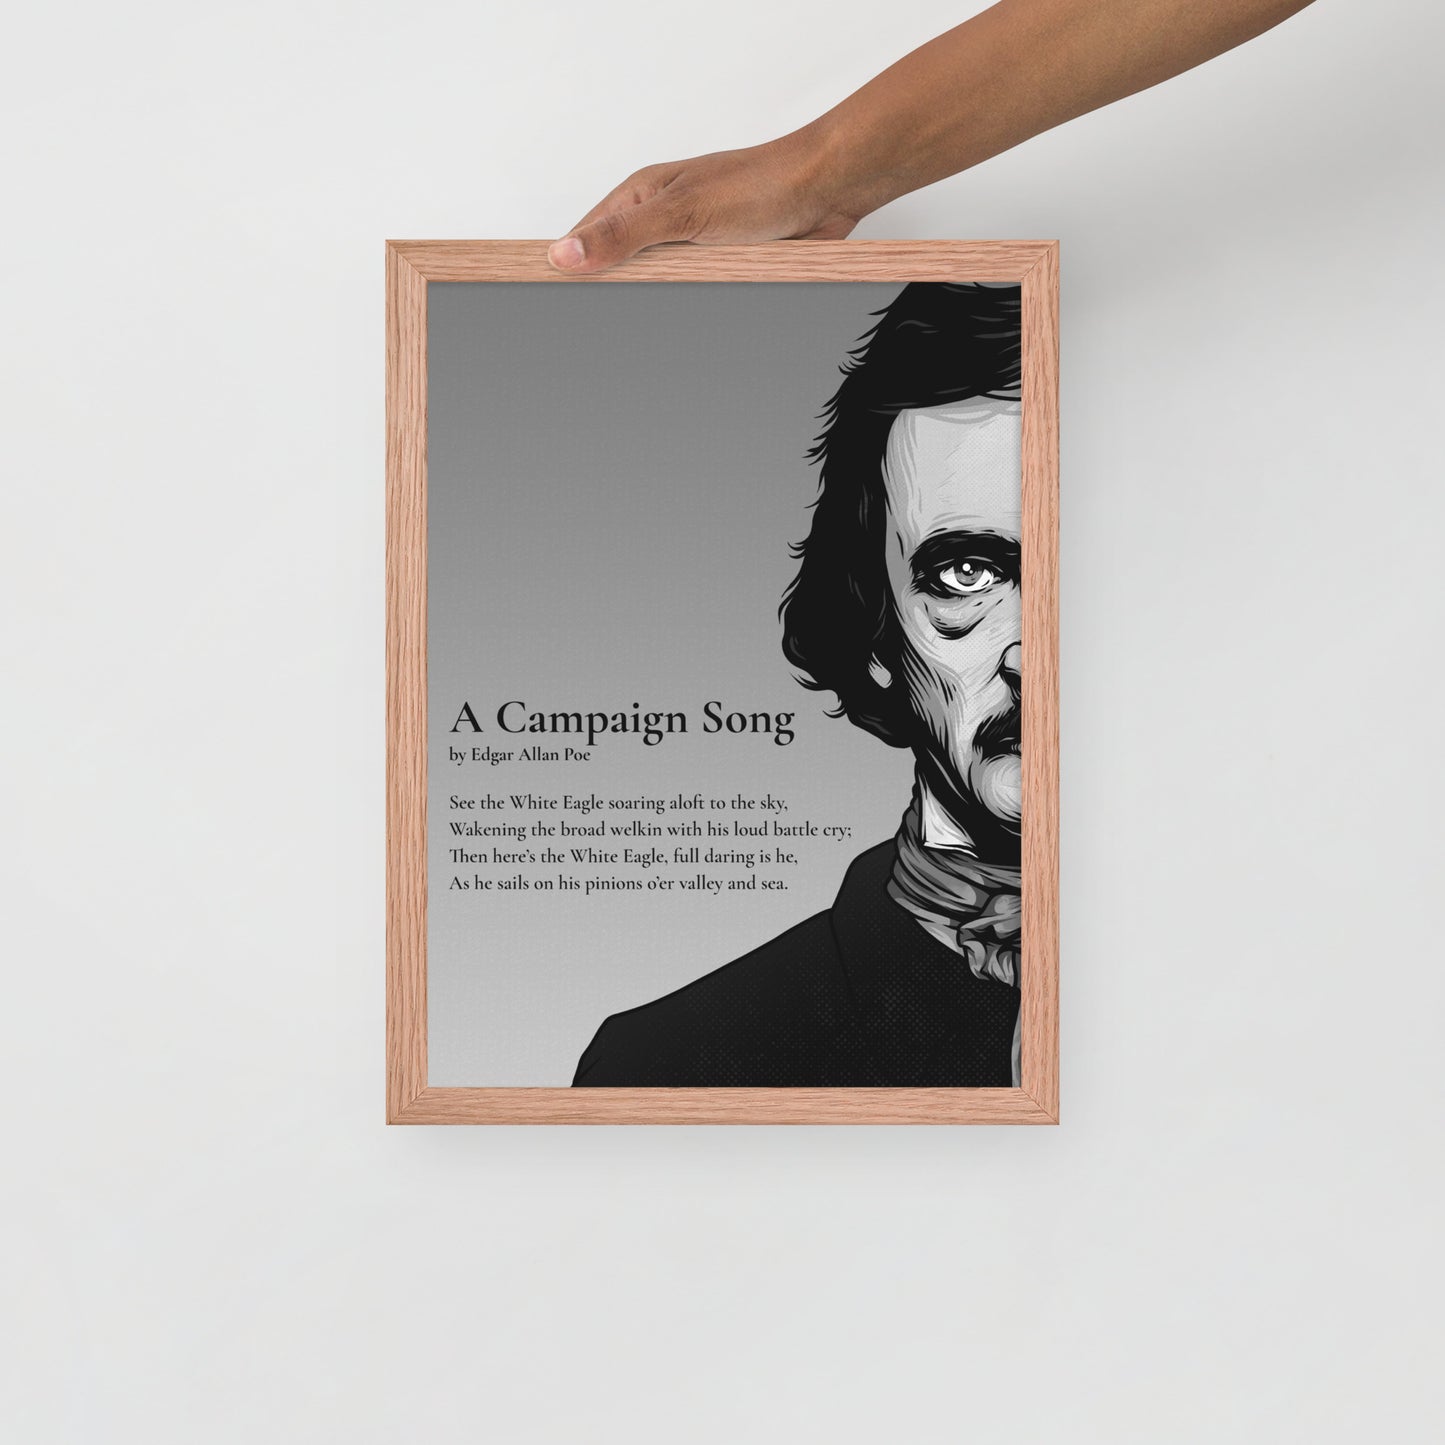 Edgar Allan Poe's 'A Campaign Song' Framed Matted Poster - 12 x 16 Red Oak Frame